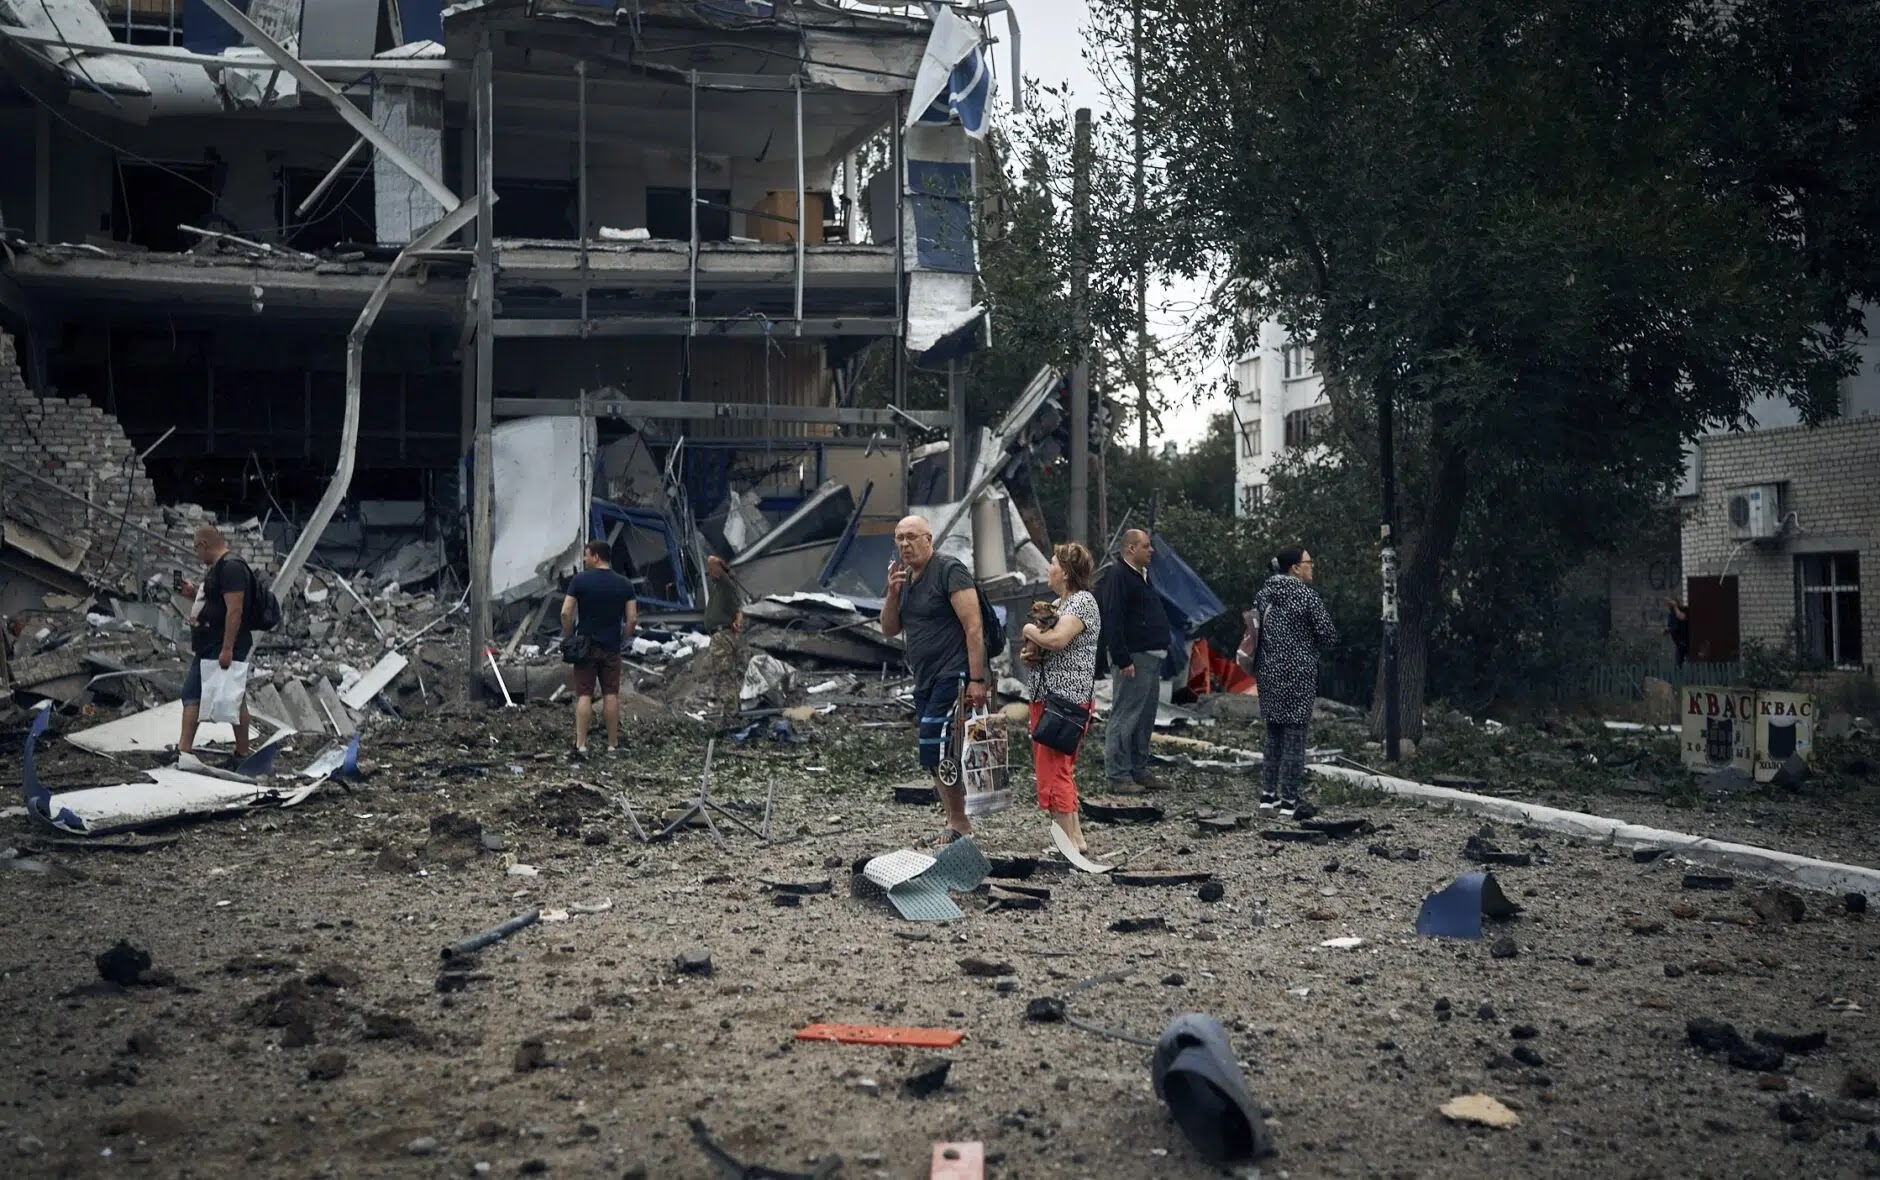 People stand in front of destroyed buildings after Russian shelling in Mykolaiv, Ukraine, on Wednesday, Aug. 3, 2022. (AP Photo/Kostiantyn Liberov)